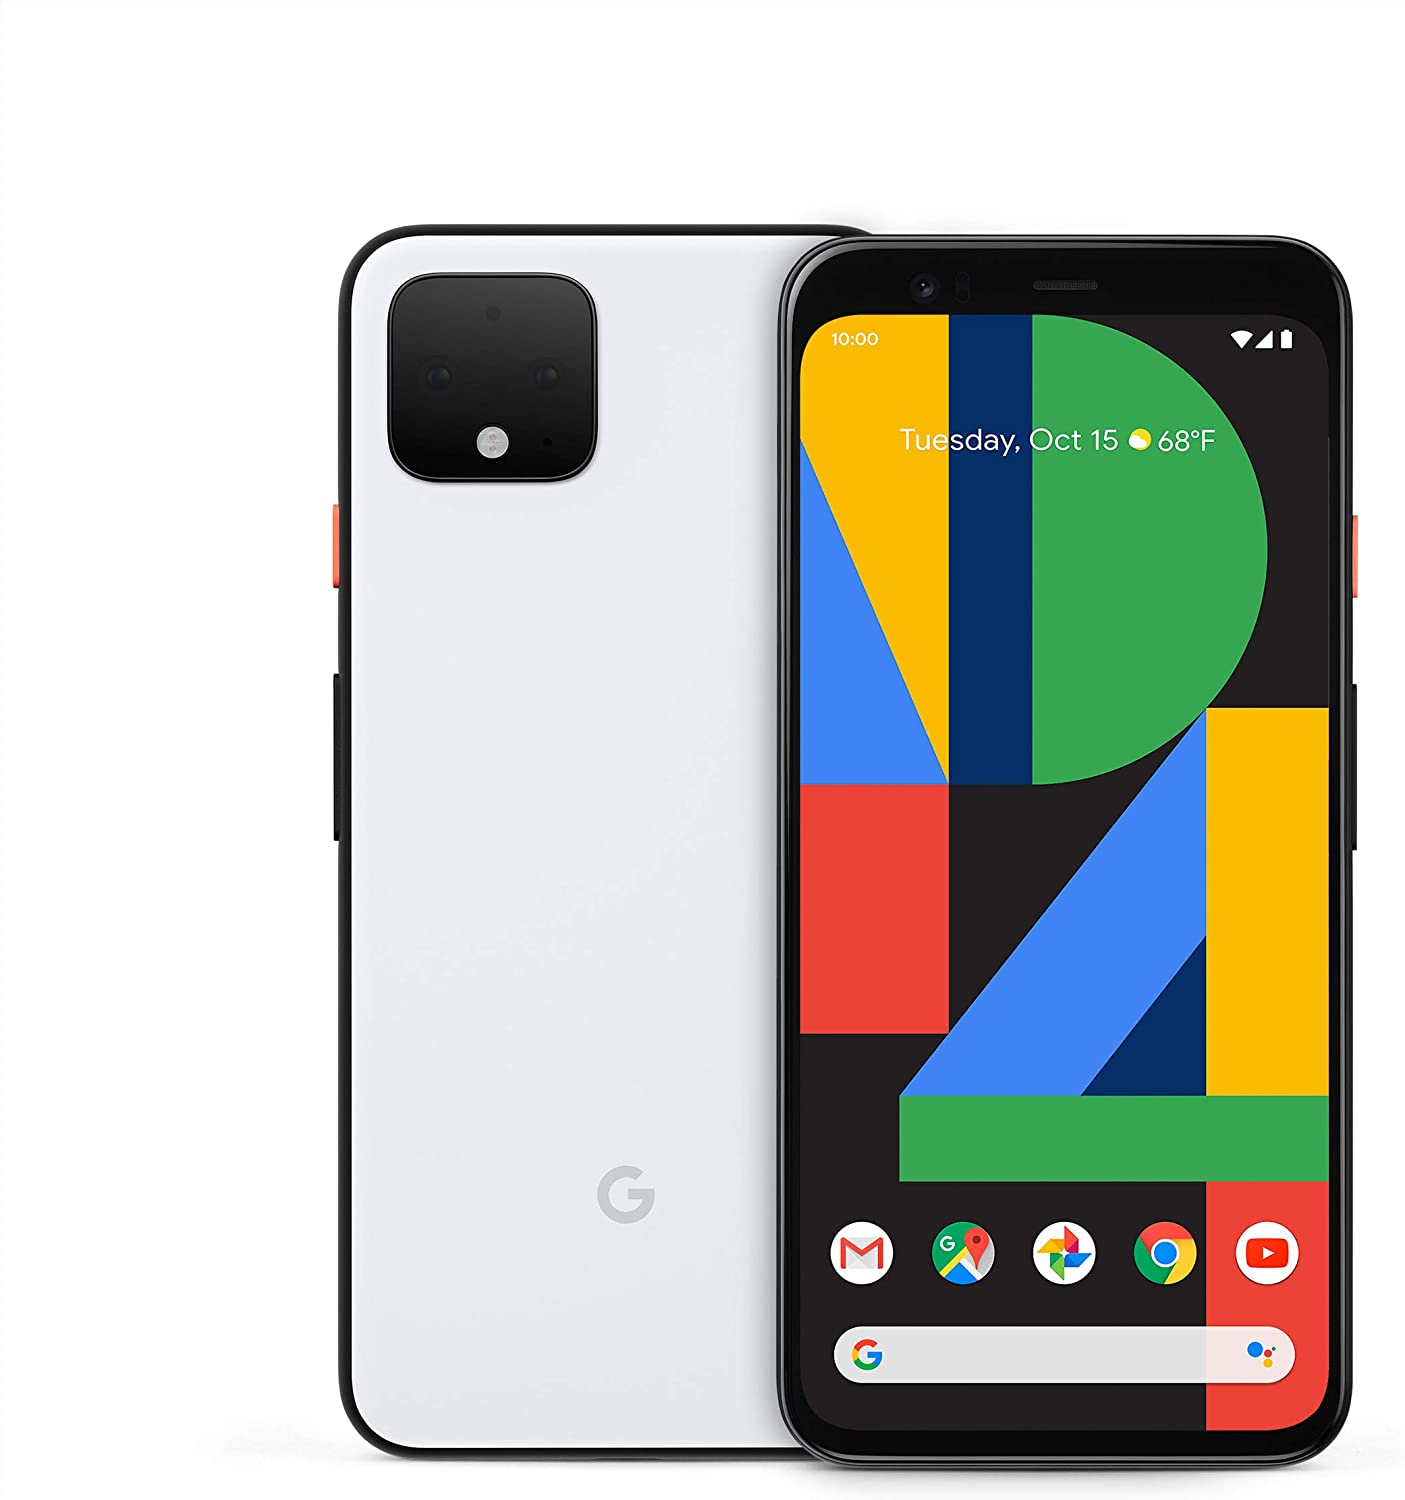 Google Pixel 4 Clearly White 64GB (Unlocked)